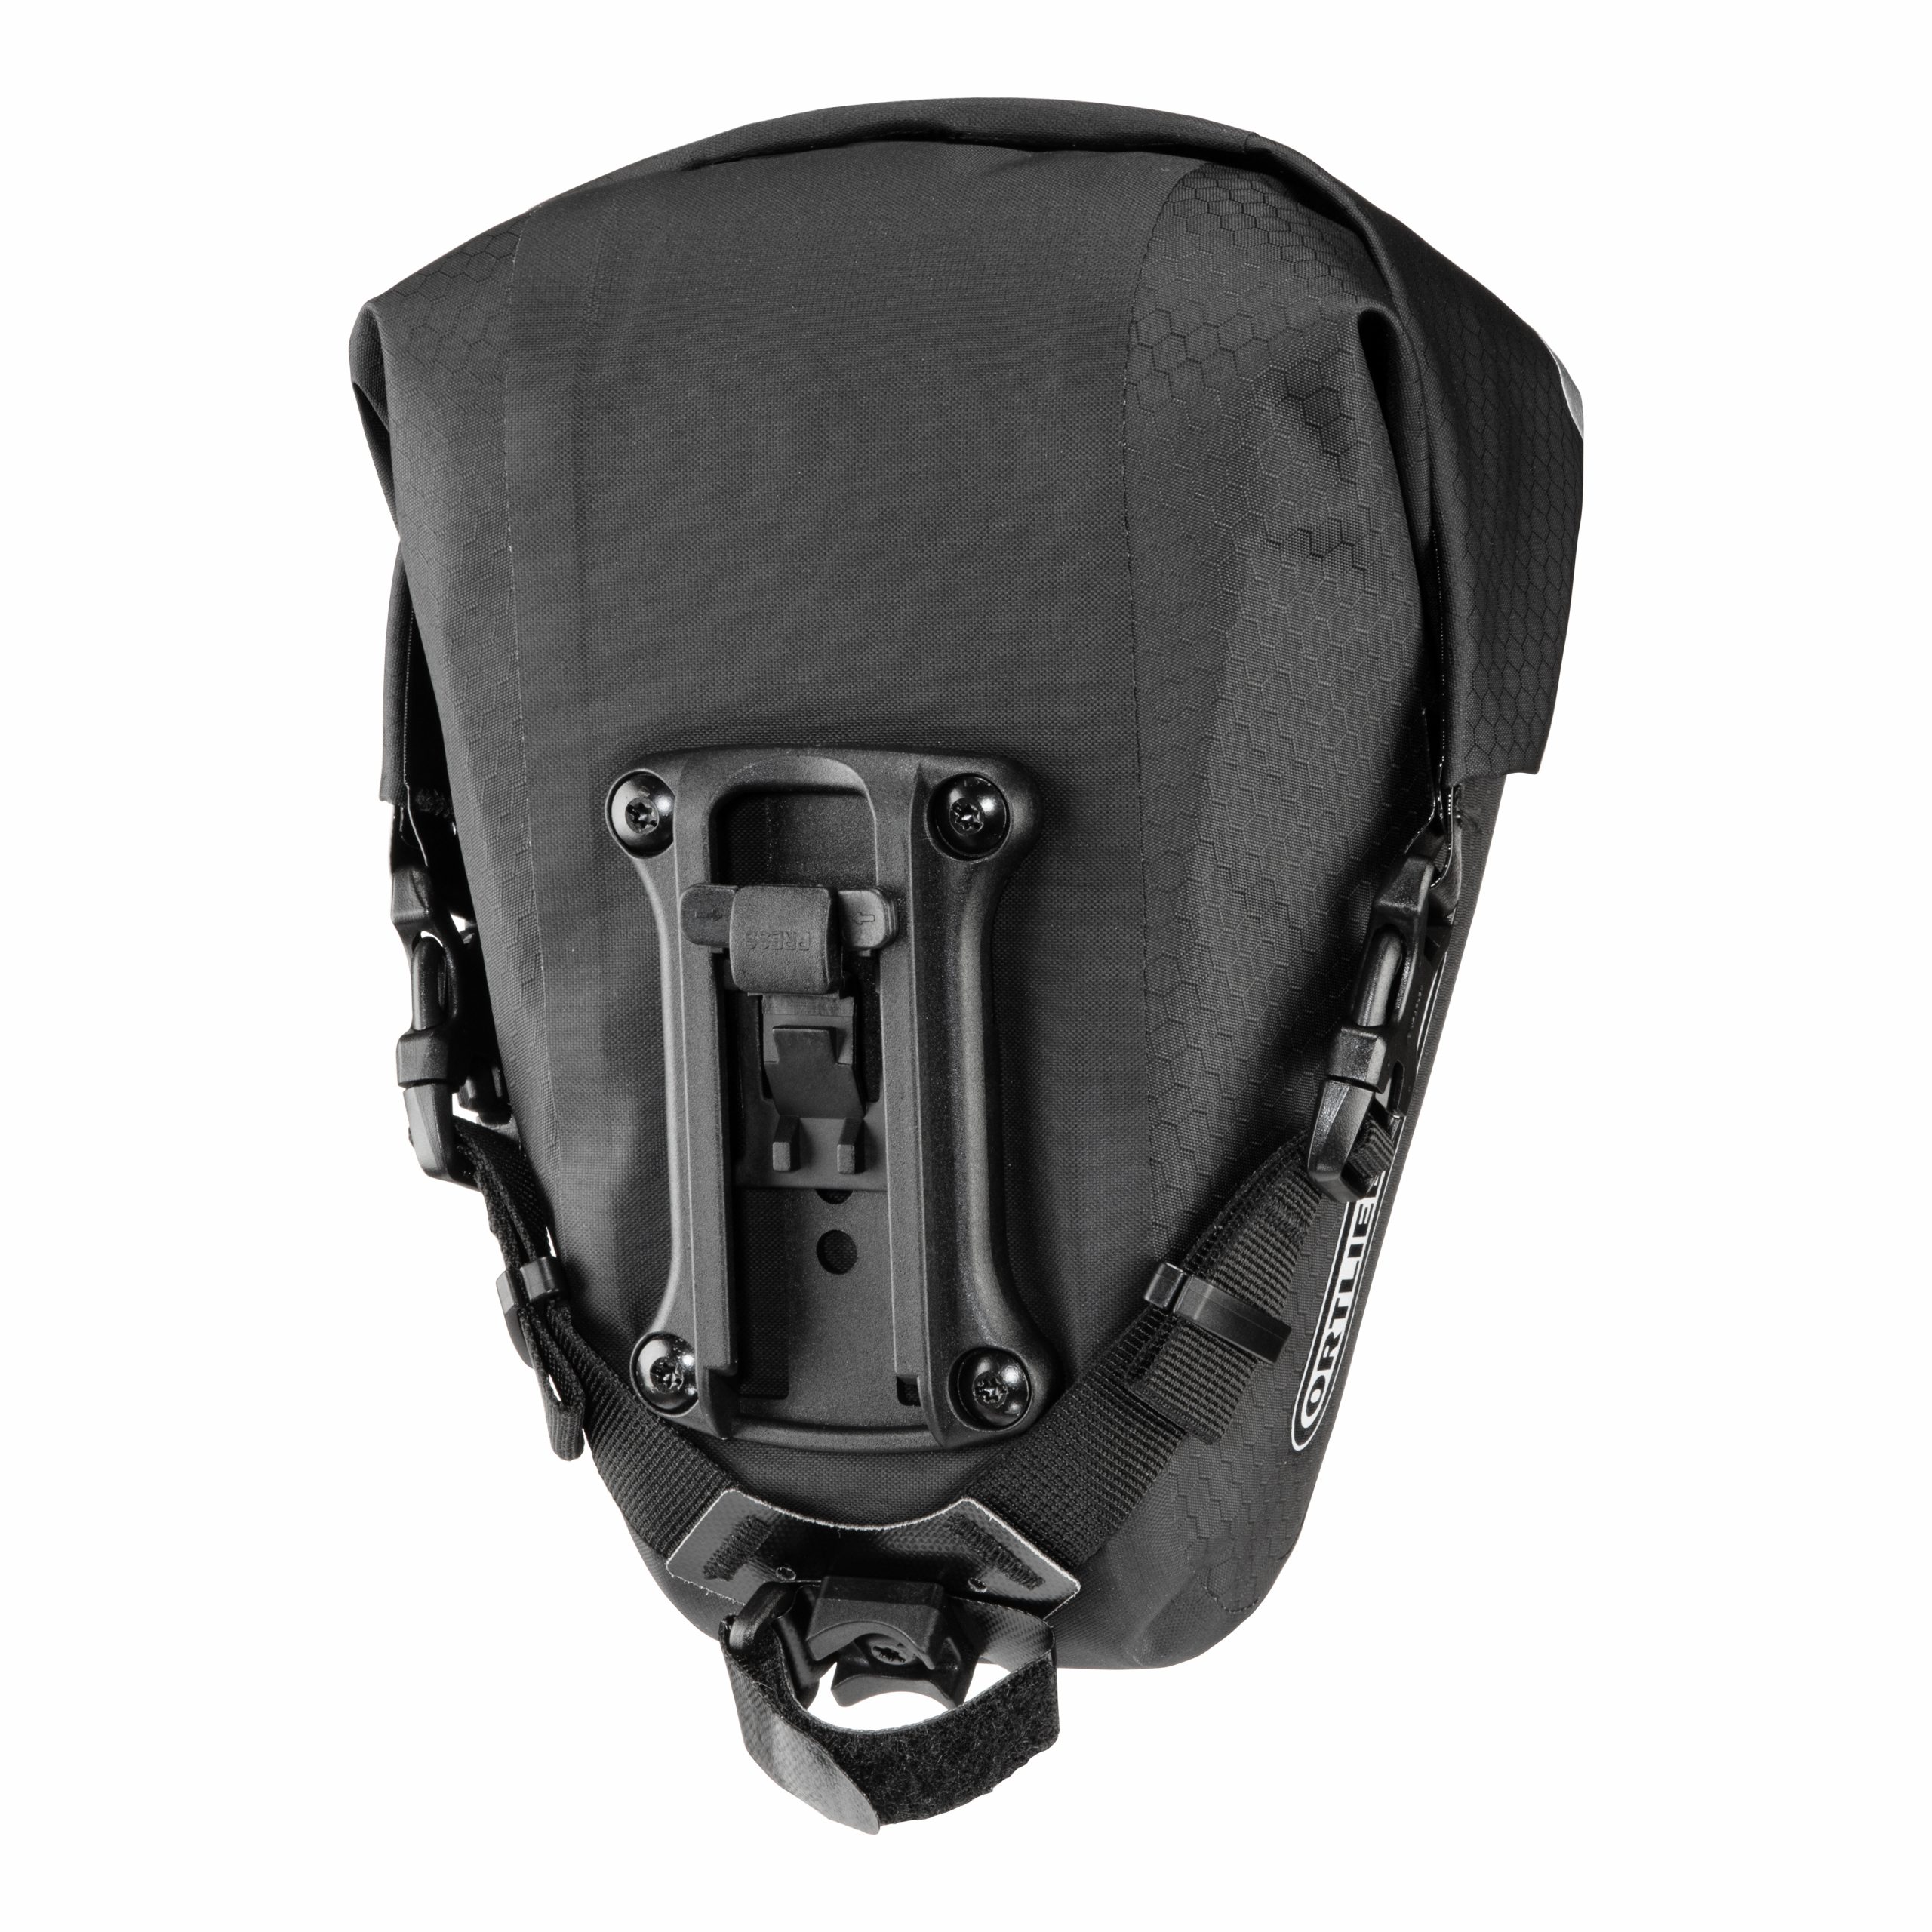 Saddle Bag | Buy Saddle Bag Online at Best Price from Riders Junction